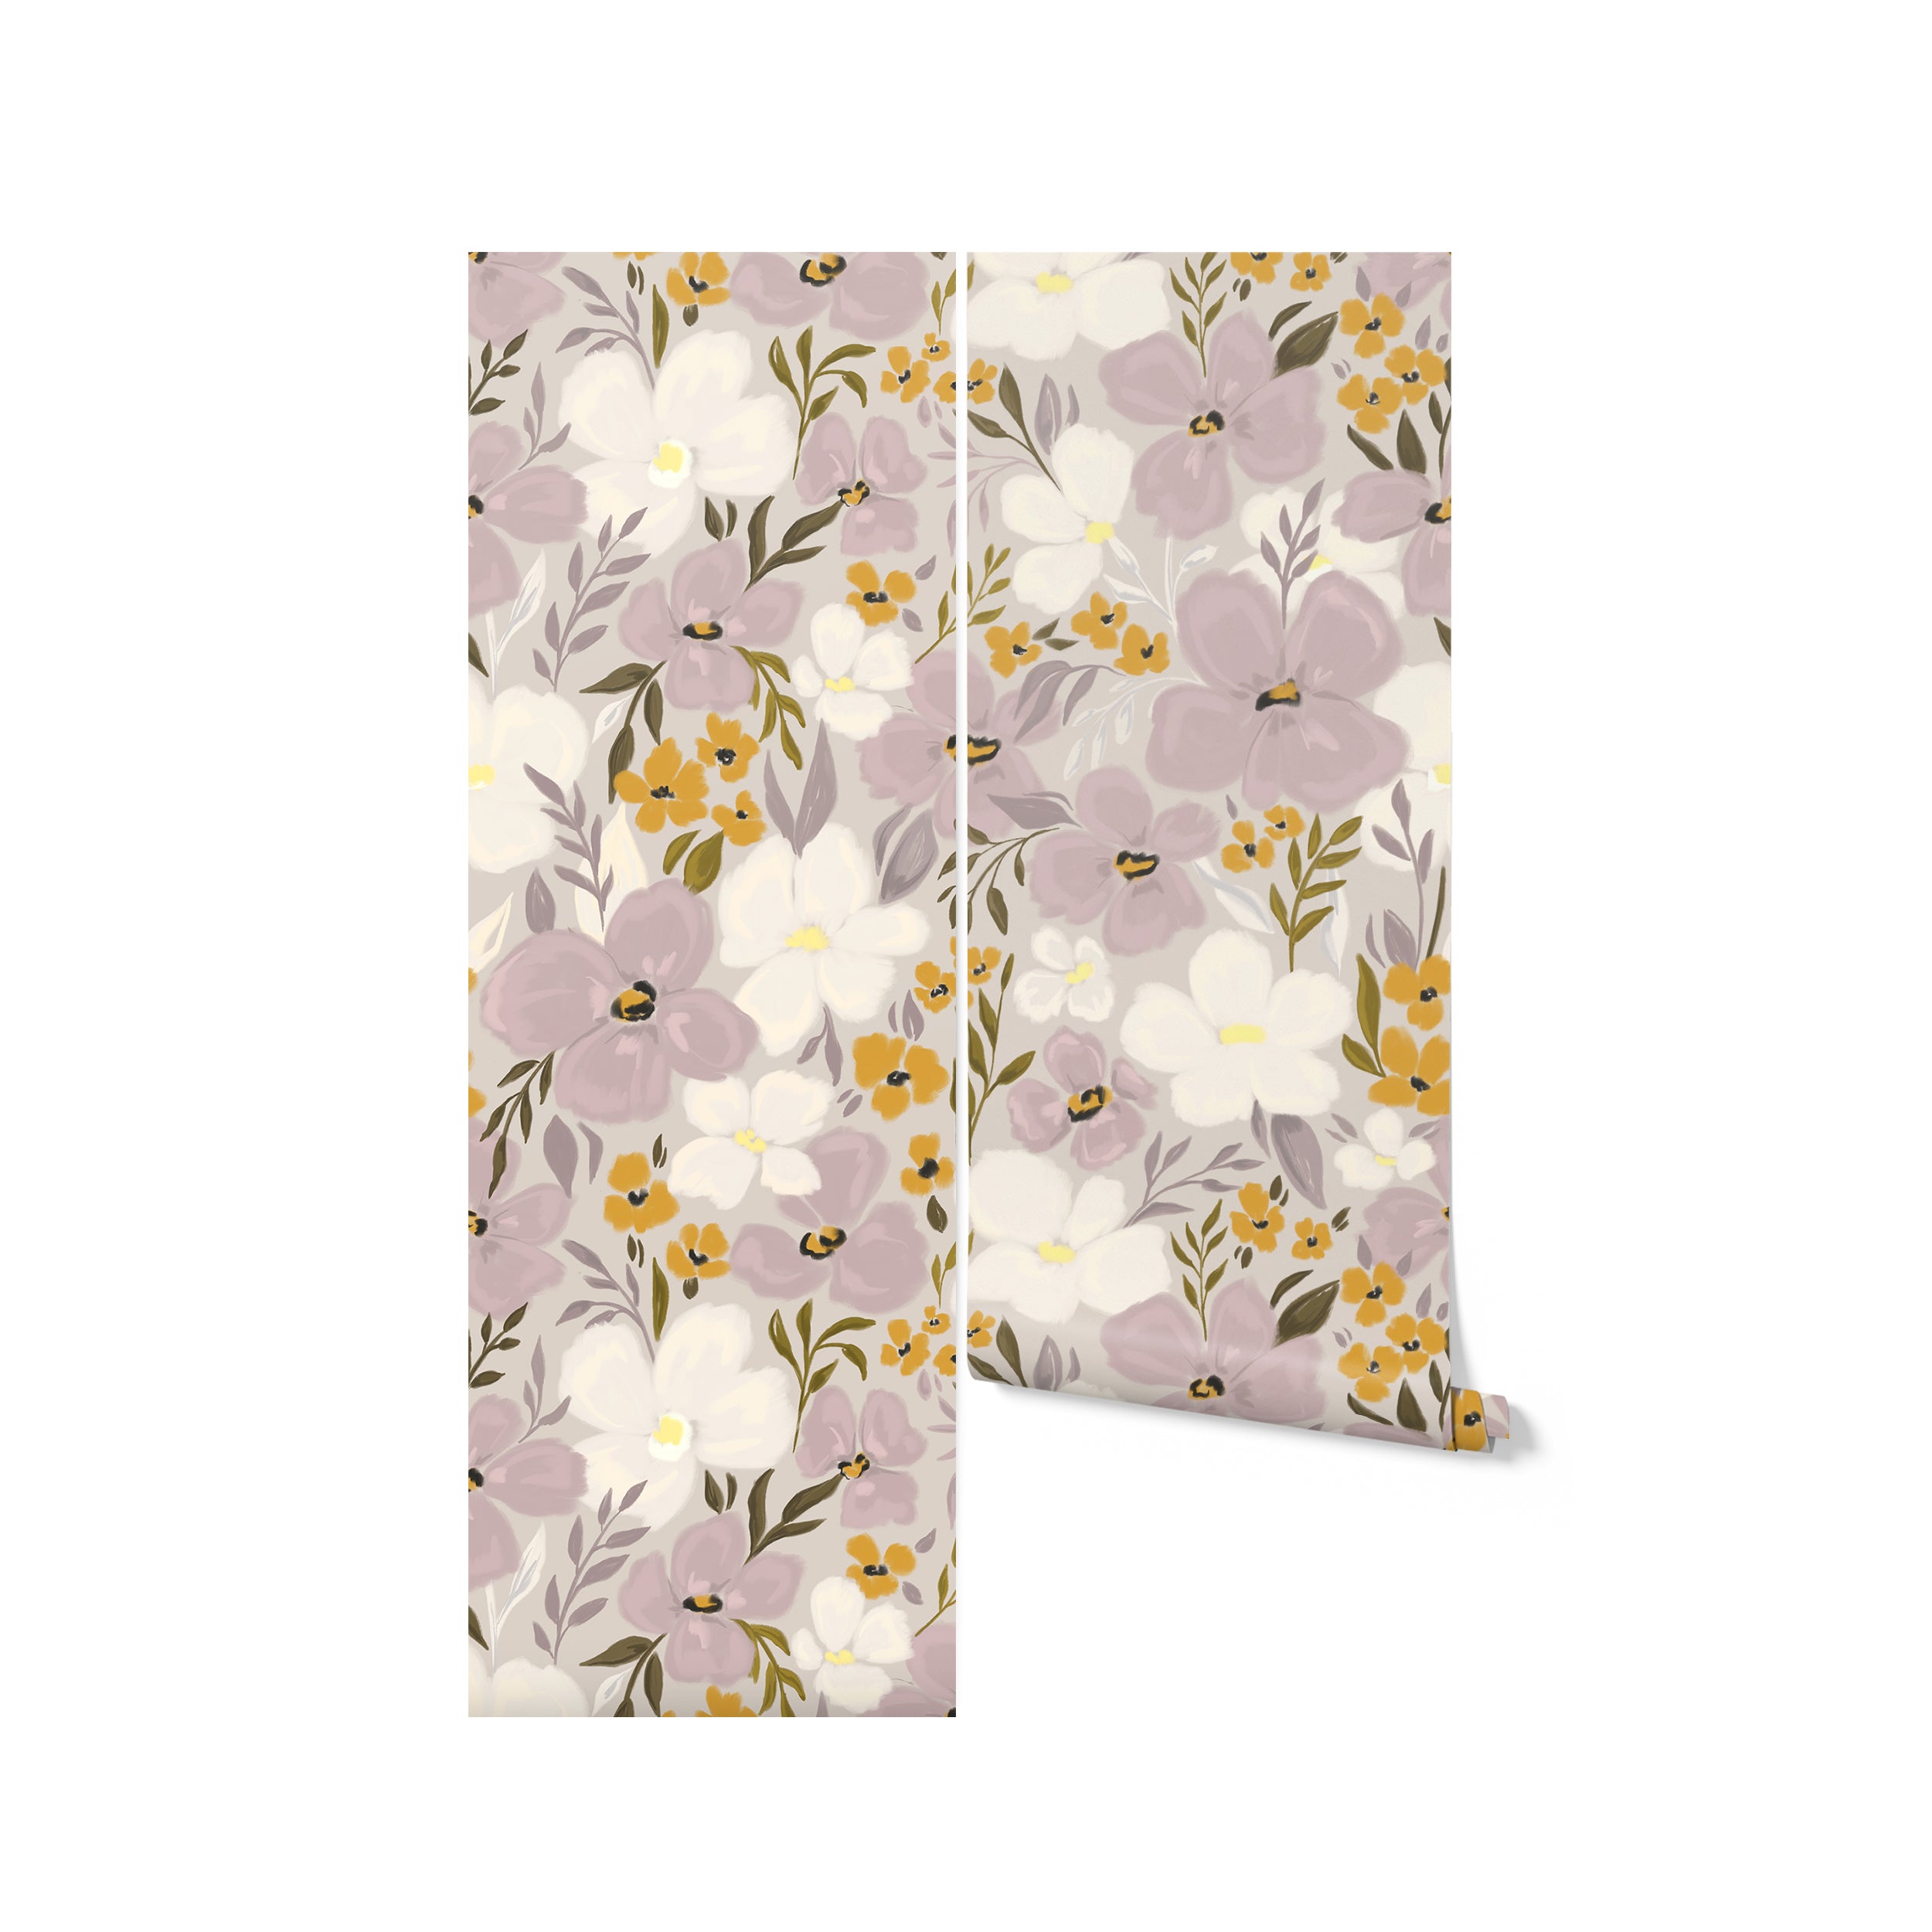 Three panels of the Fleur Wallpaper displayed vertically. Each panel features the continuous floral pattern, with the soft purple, white, and yellow flowers seamlessly flowing from one panel to the next. This presentation highlights the cohesive and tranquil design of the wallpaper, perfect for adding a touch of nature-inspired beauty to any interior space.